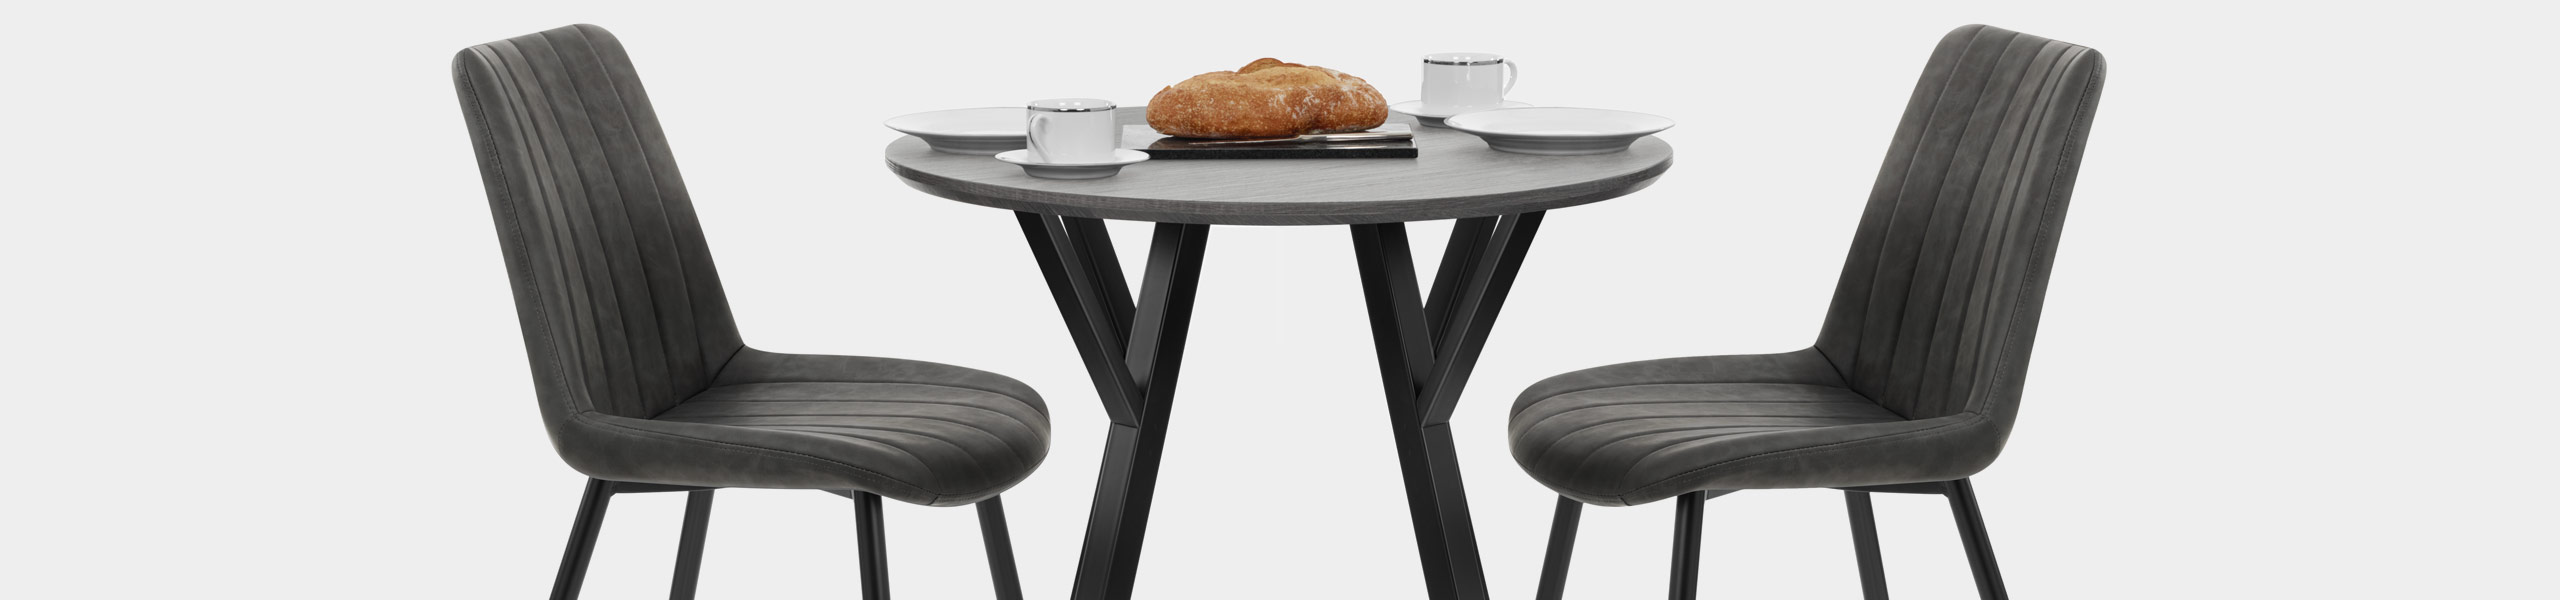 Wessex Dining Set Grey Wood & Charcoal Video Banner